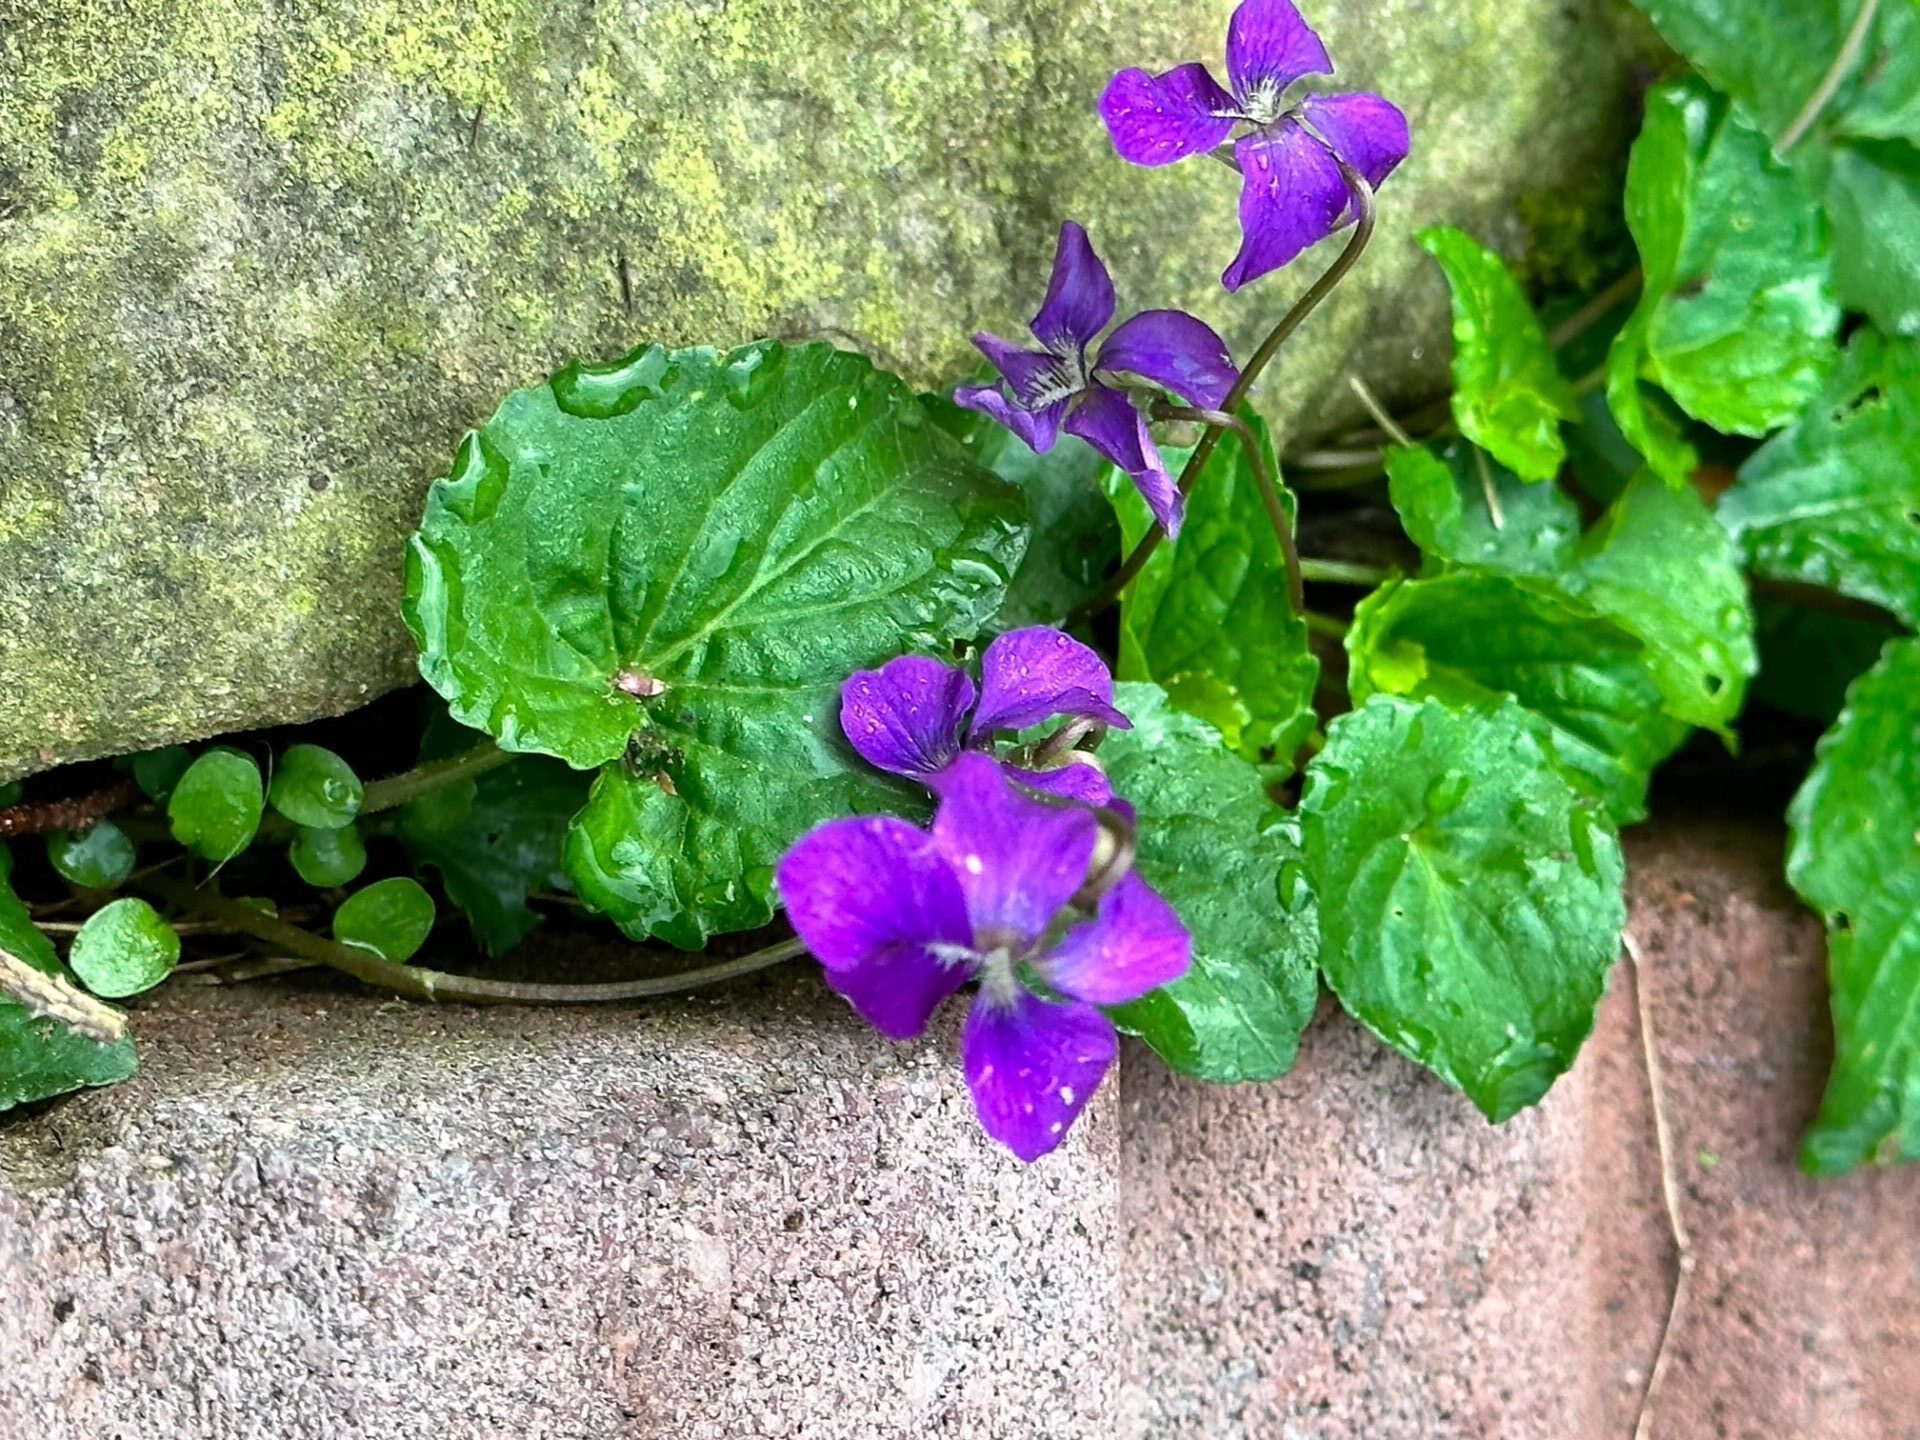 A fine of purple violets are shown growing in between two stones.